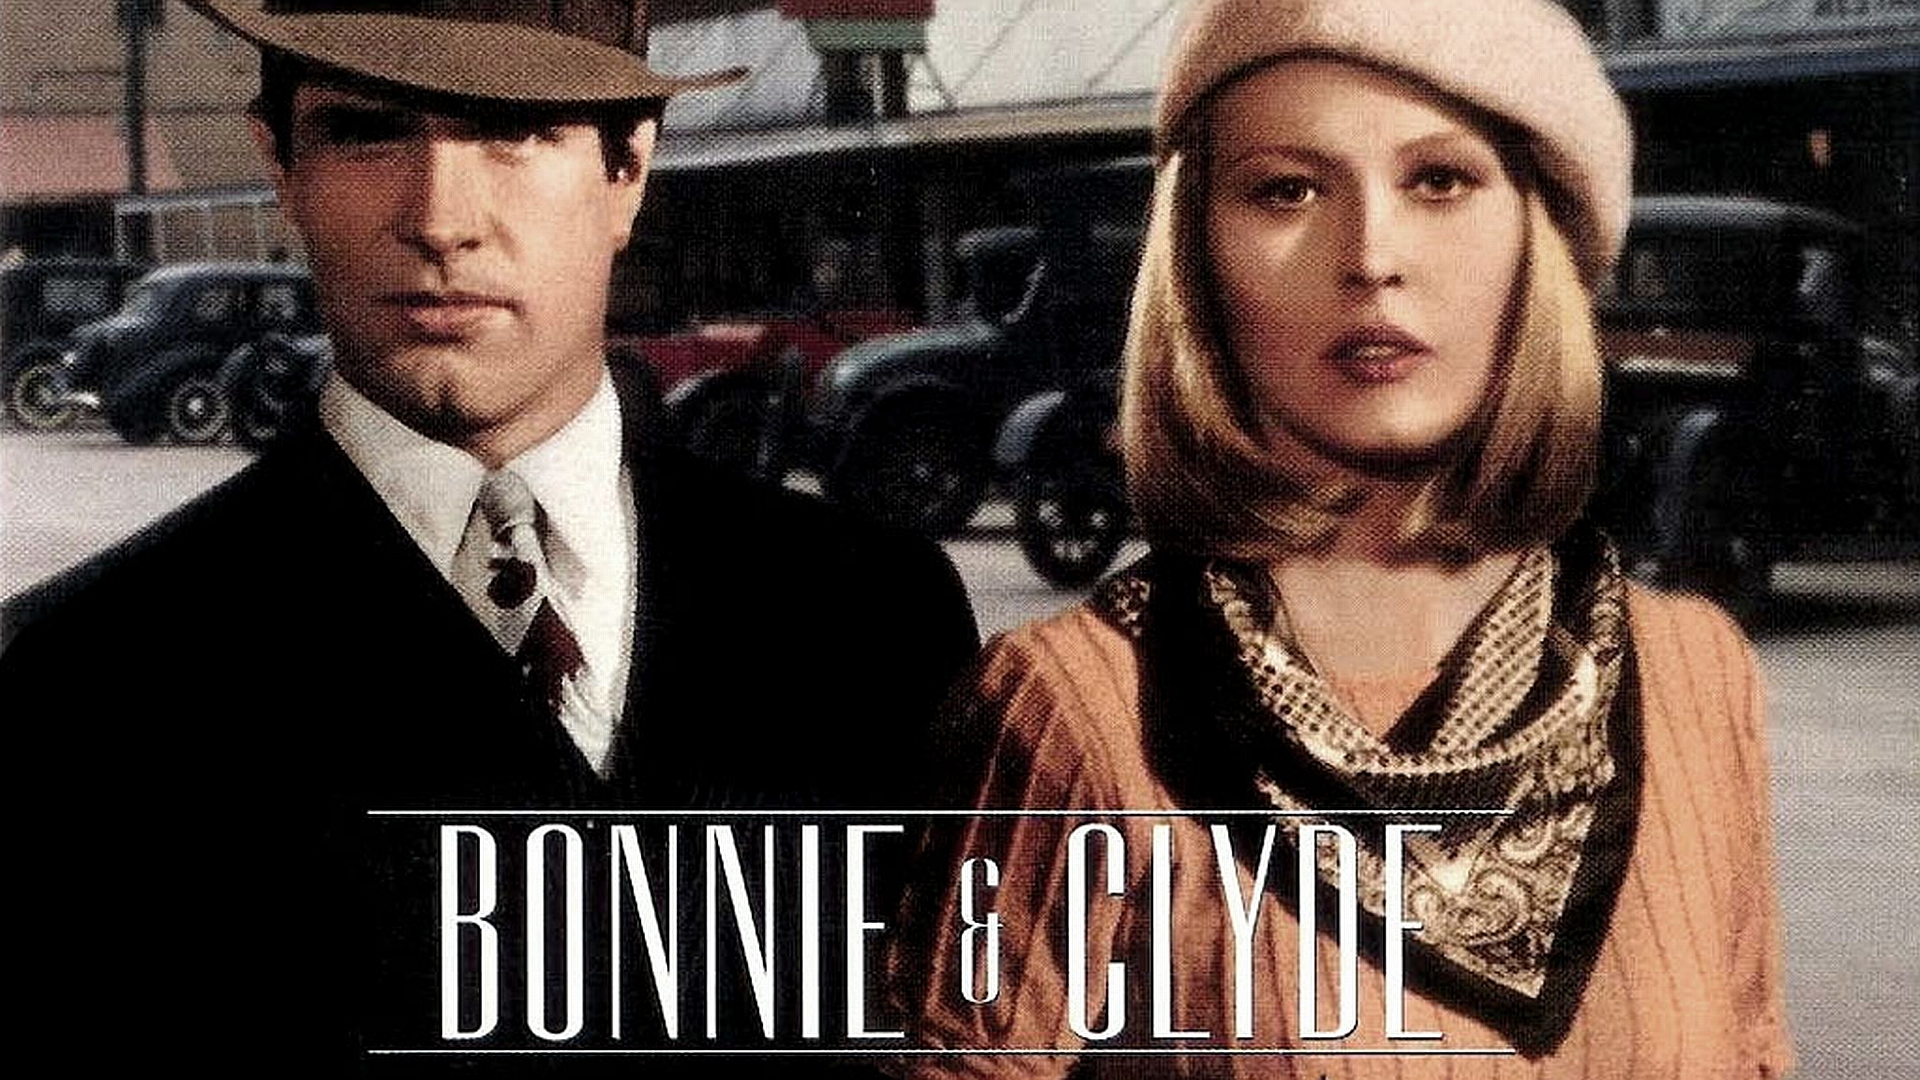 A thrilling scene from the movie Bonnie and Clyde.